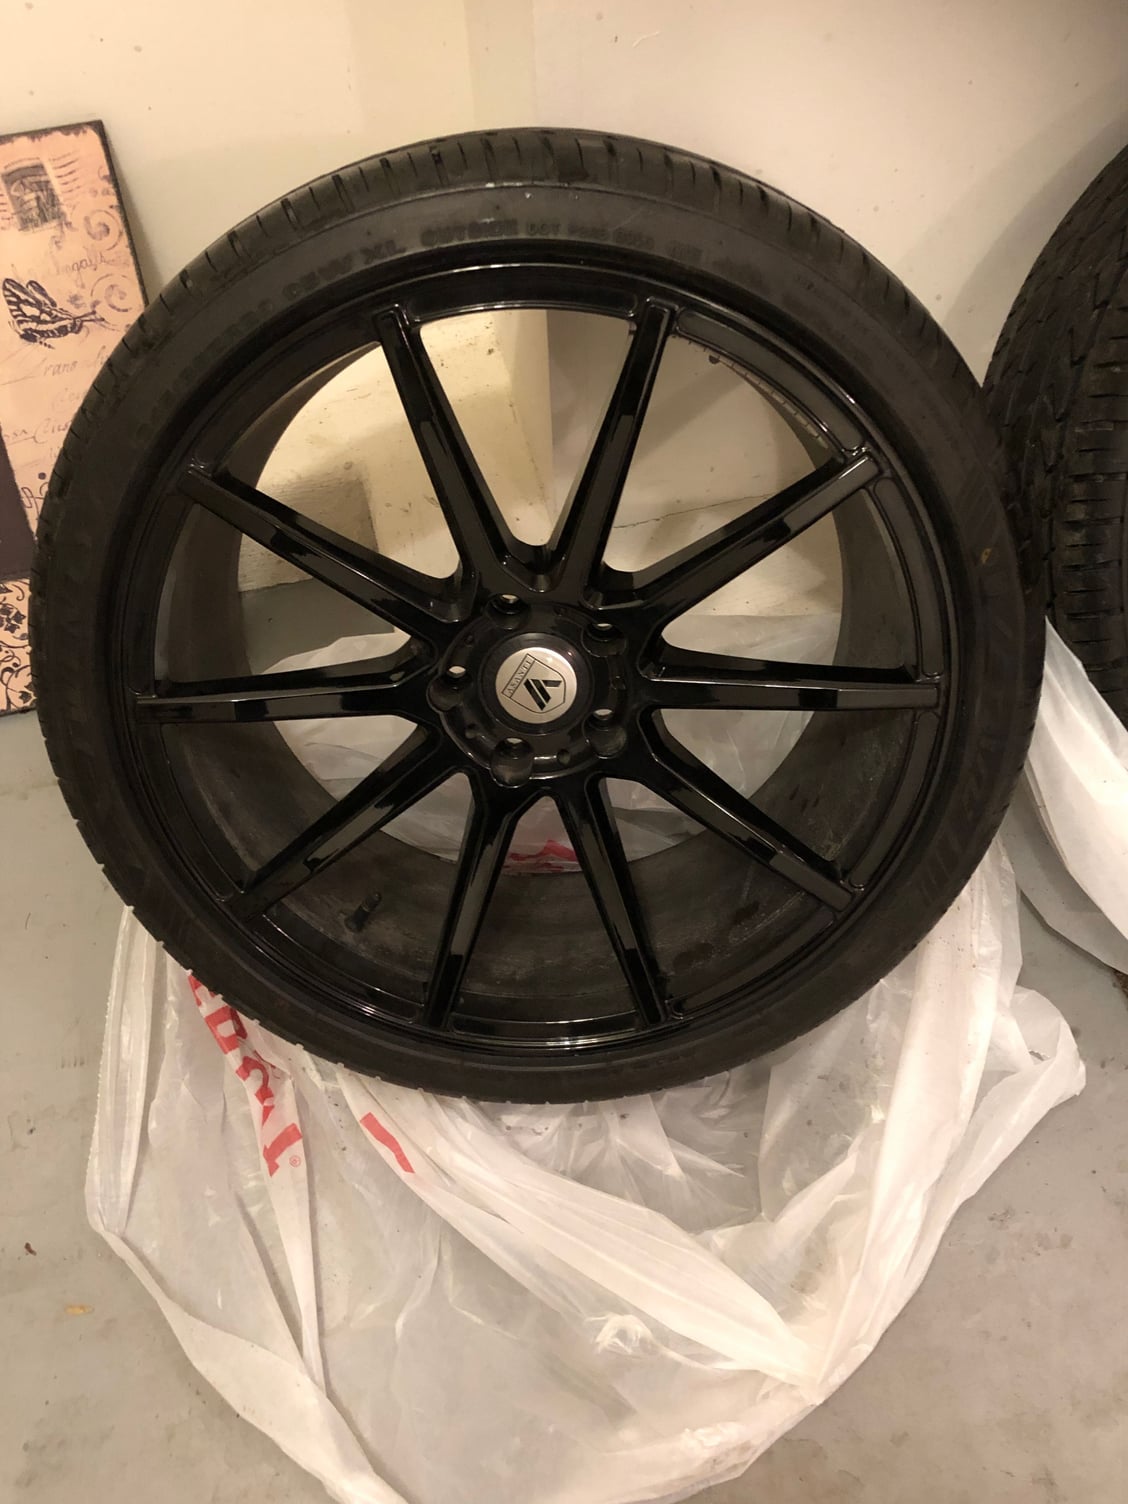 Wheels and Tires/Axles - FS: Asanti ABL-20's in gloss black - Used - 2015 to 2019 Acura TLX - St Charles, IL 60175, United States